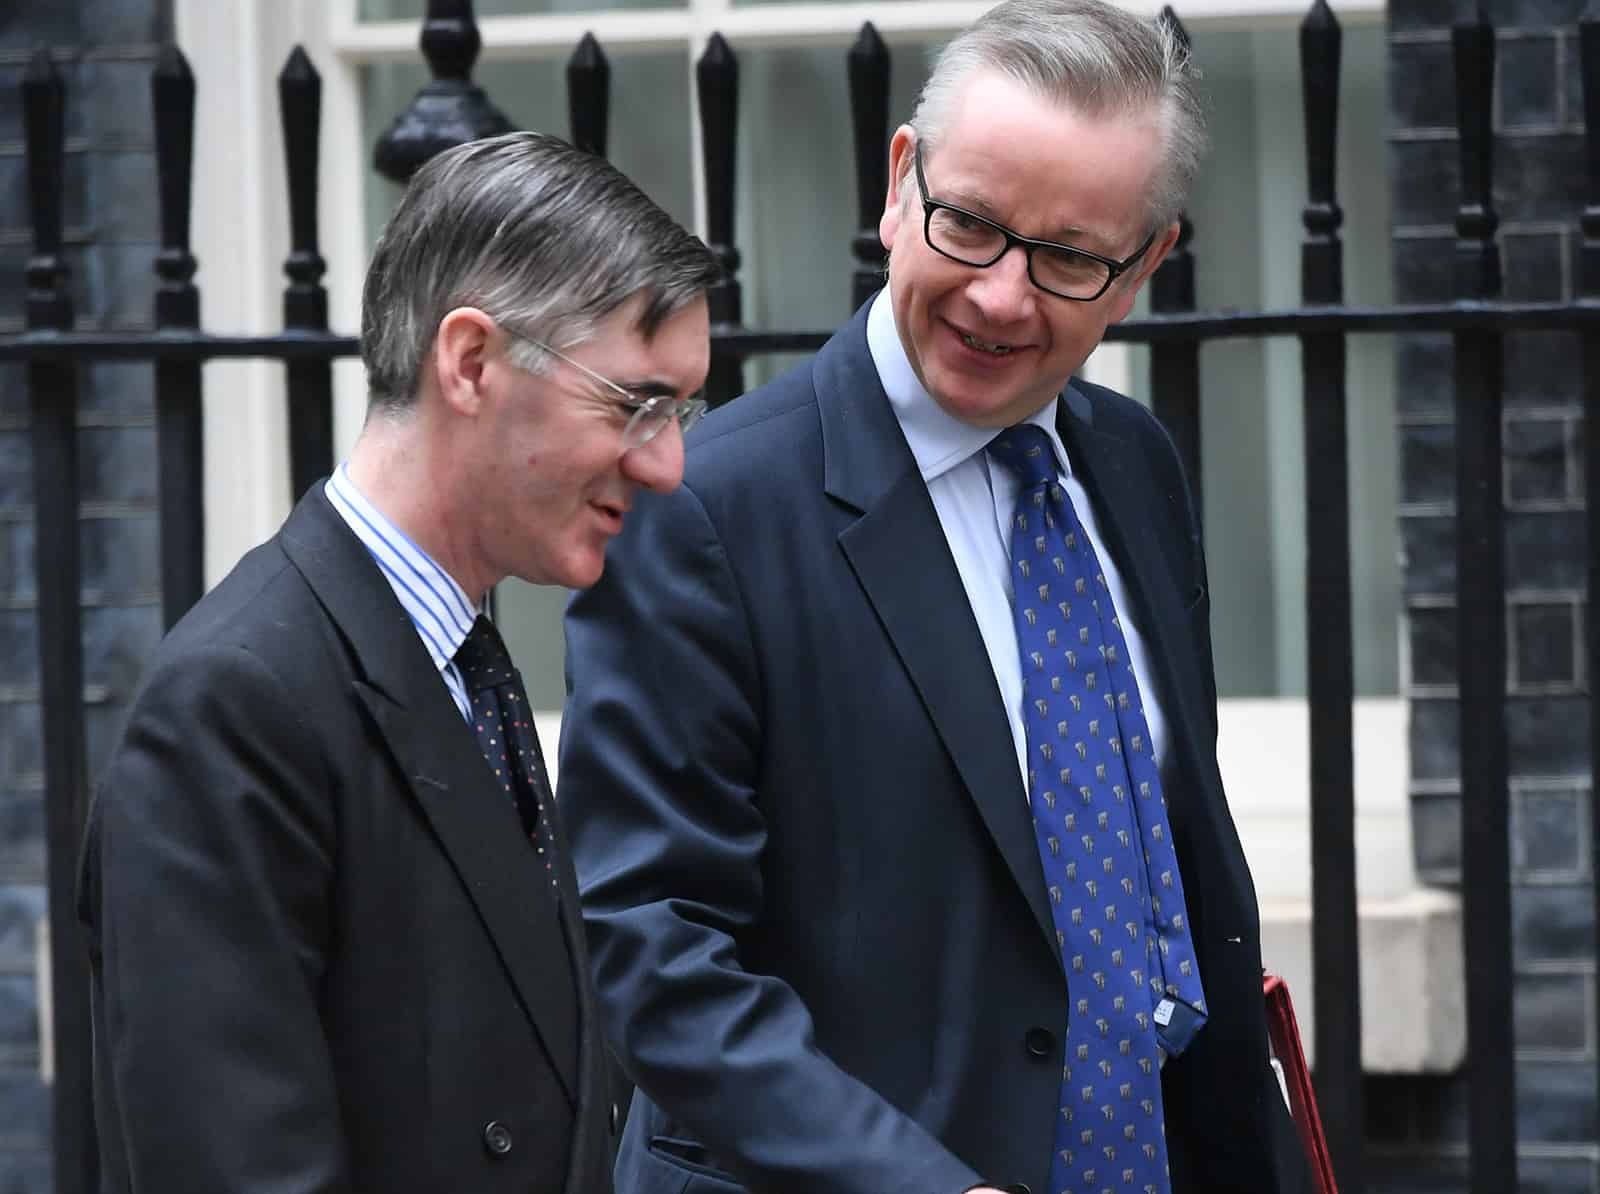 Michael Gove and Jacob Rees-Mogg trade blows across conference floor